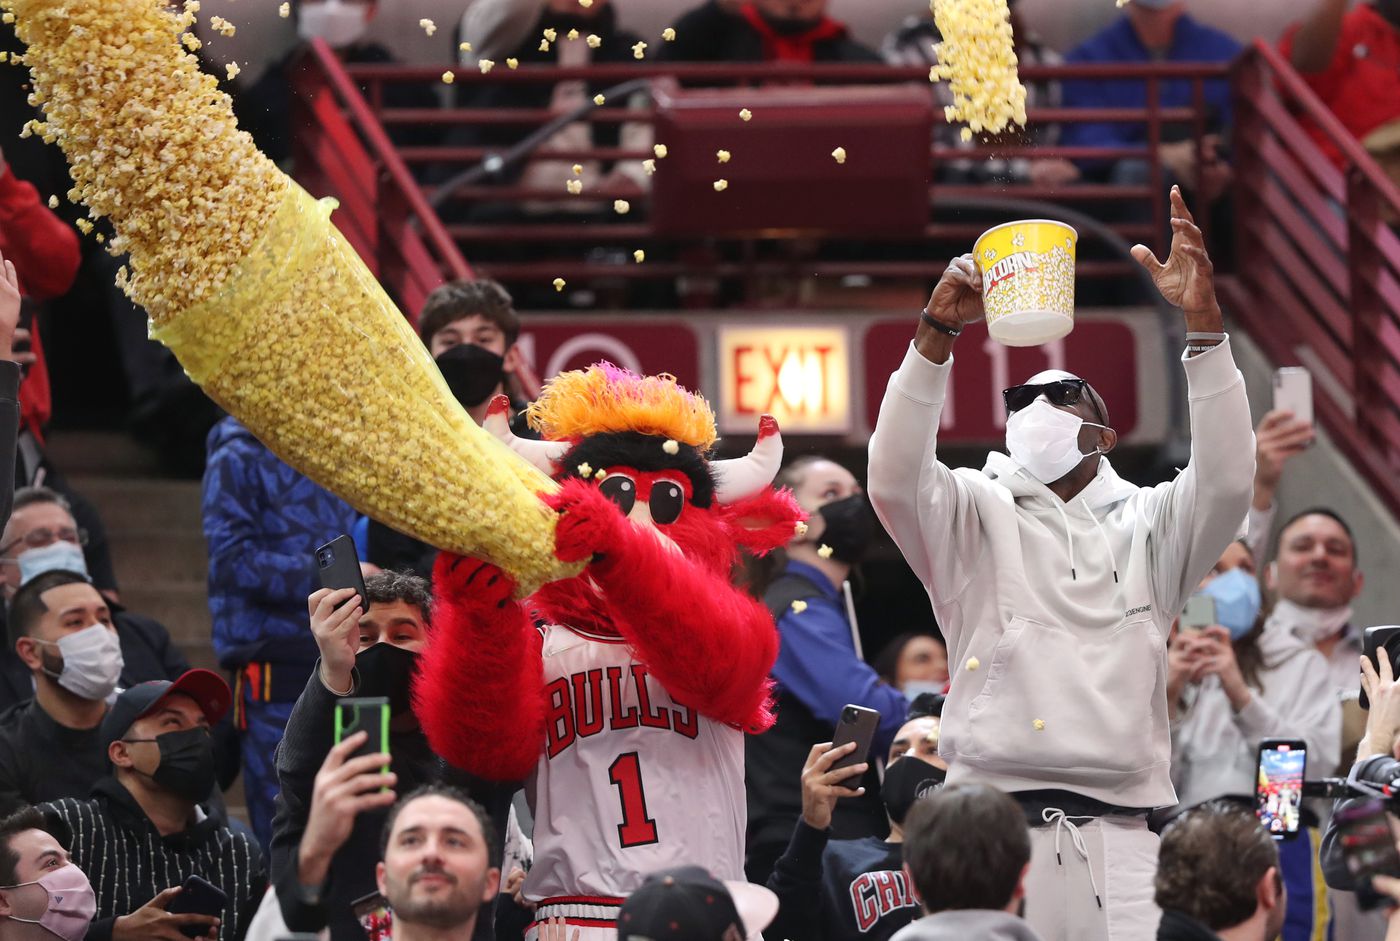 Benny the Bull and former NFL player Terrell Owens throw popcorn on fans during a timeout in the first quarter between the Chicago Bulls and Golden State Warriors at United Center on Jan. 14, 2022, in Chicago.